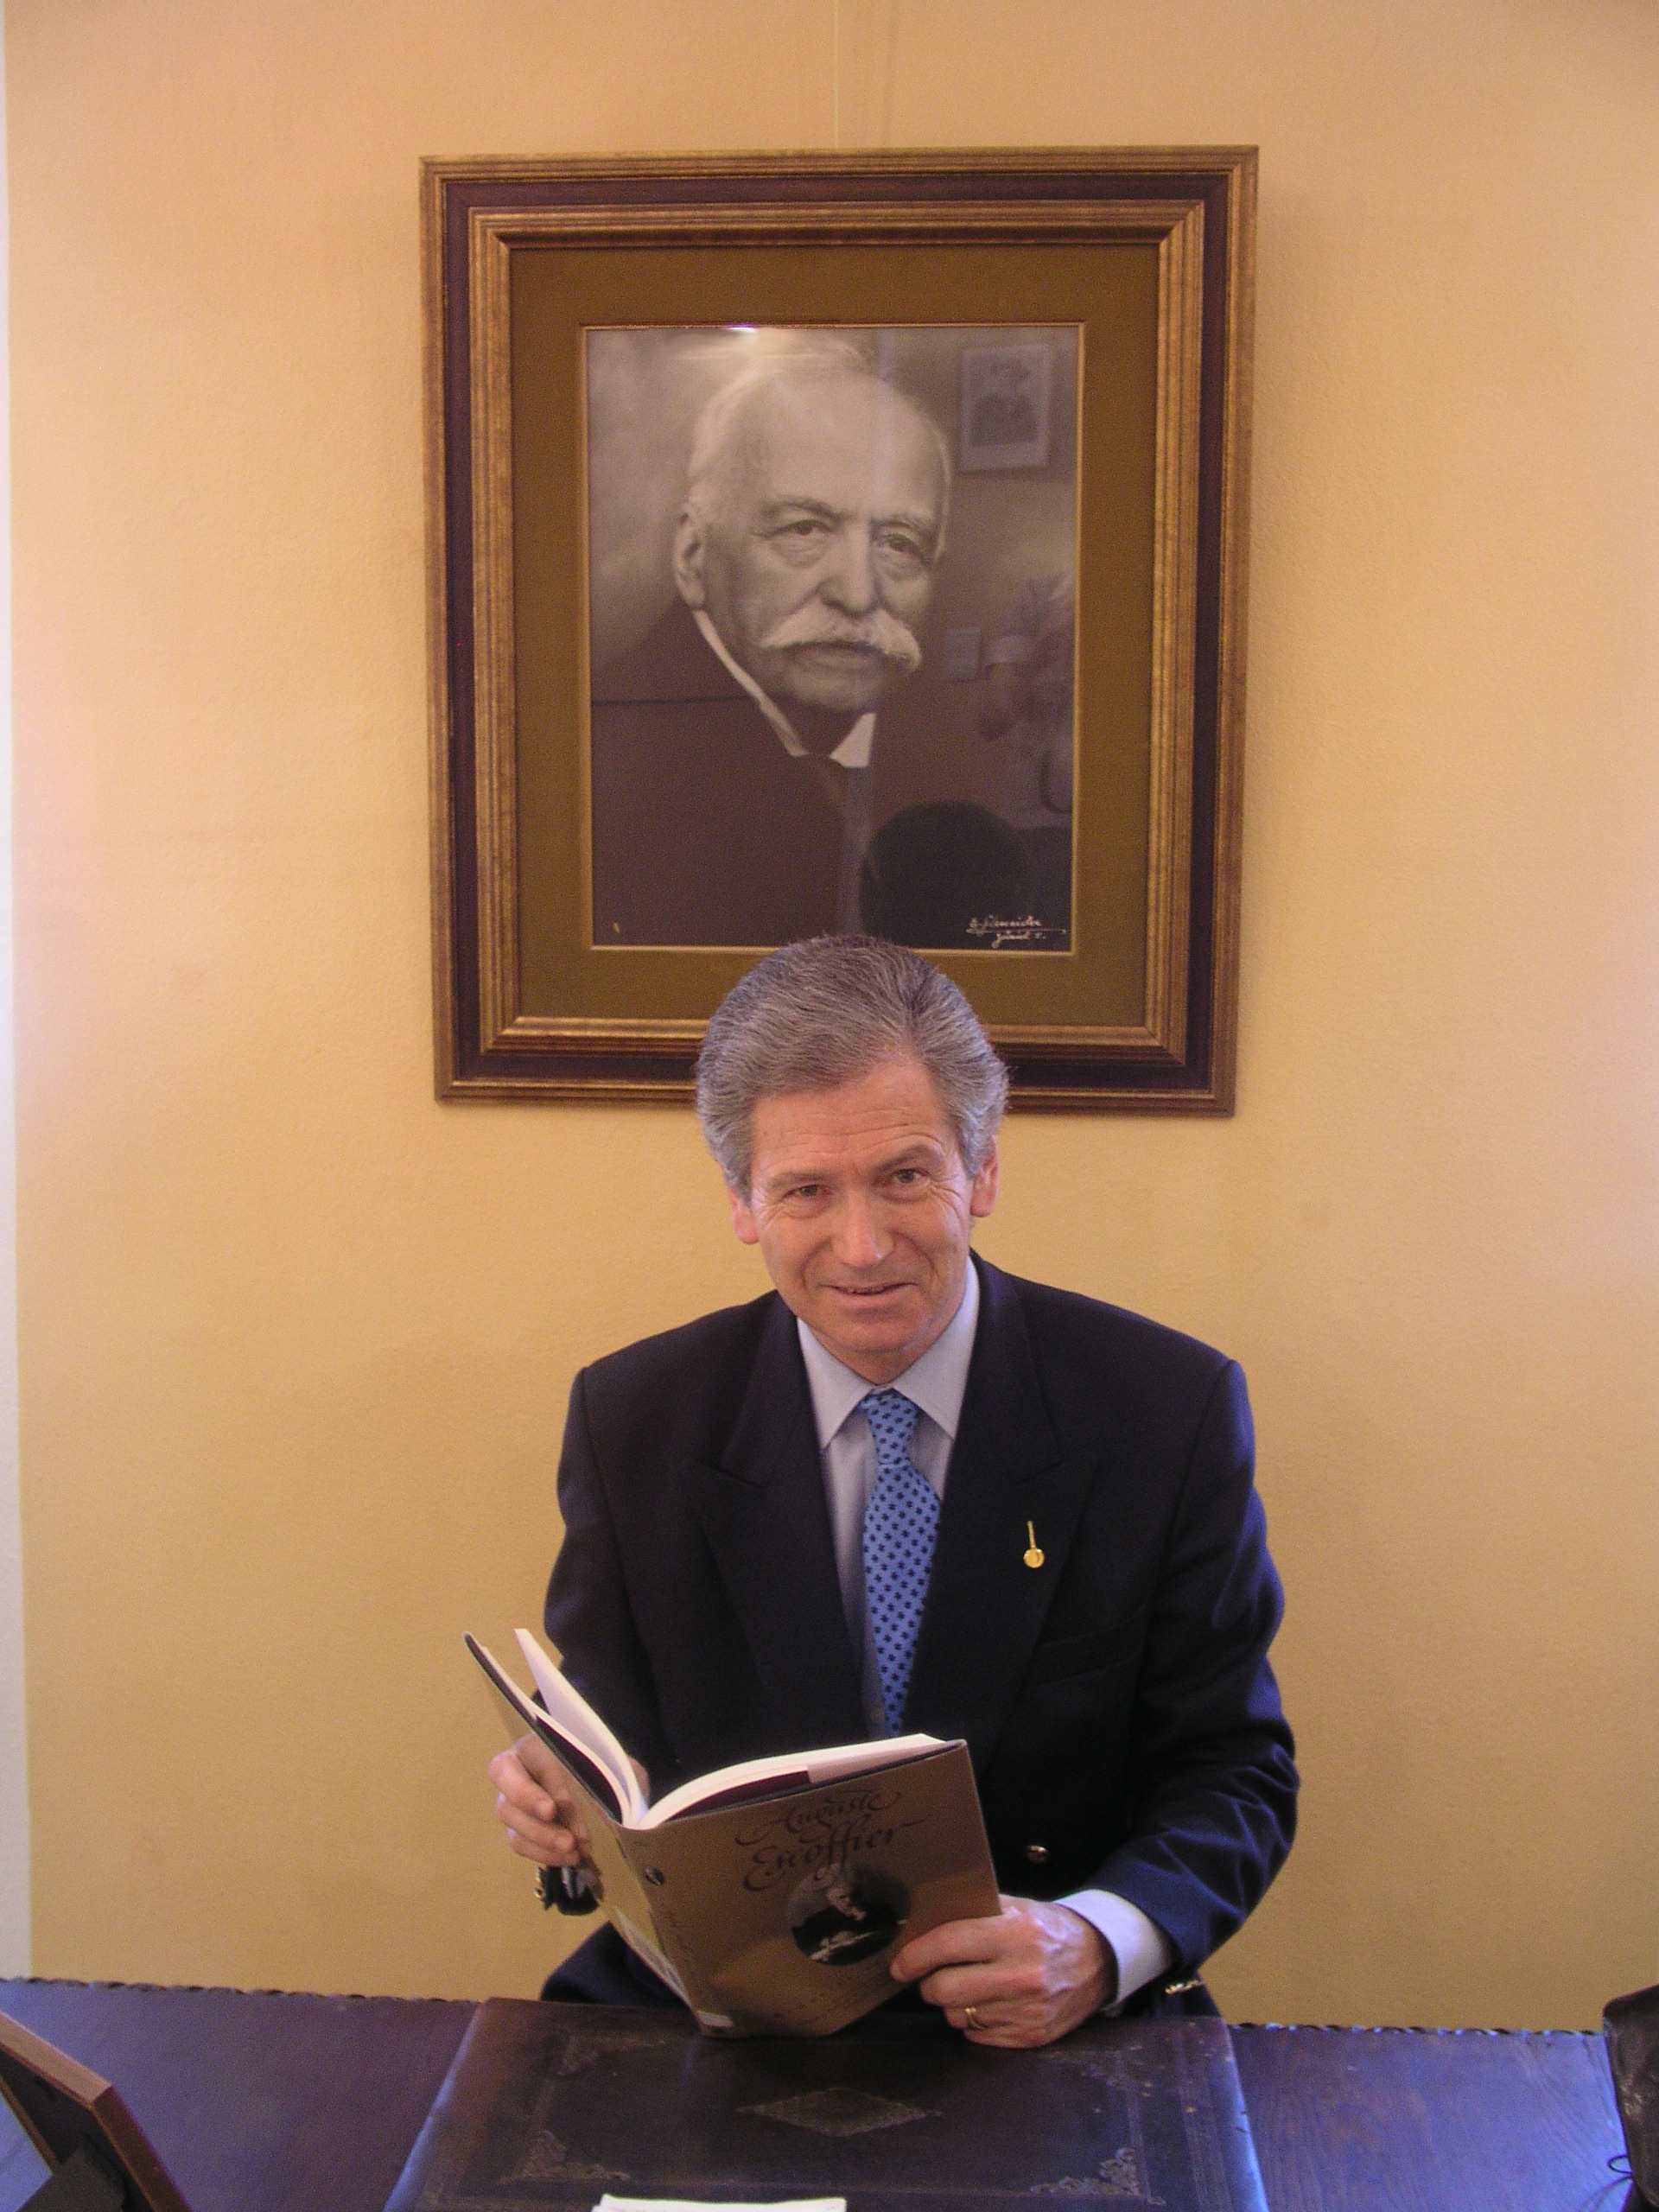 Michel Escoffier seated in front of a photo of his Great Grandfather Master Chef Auguste Escoffier